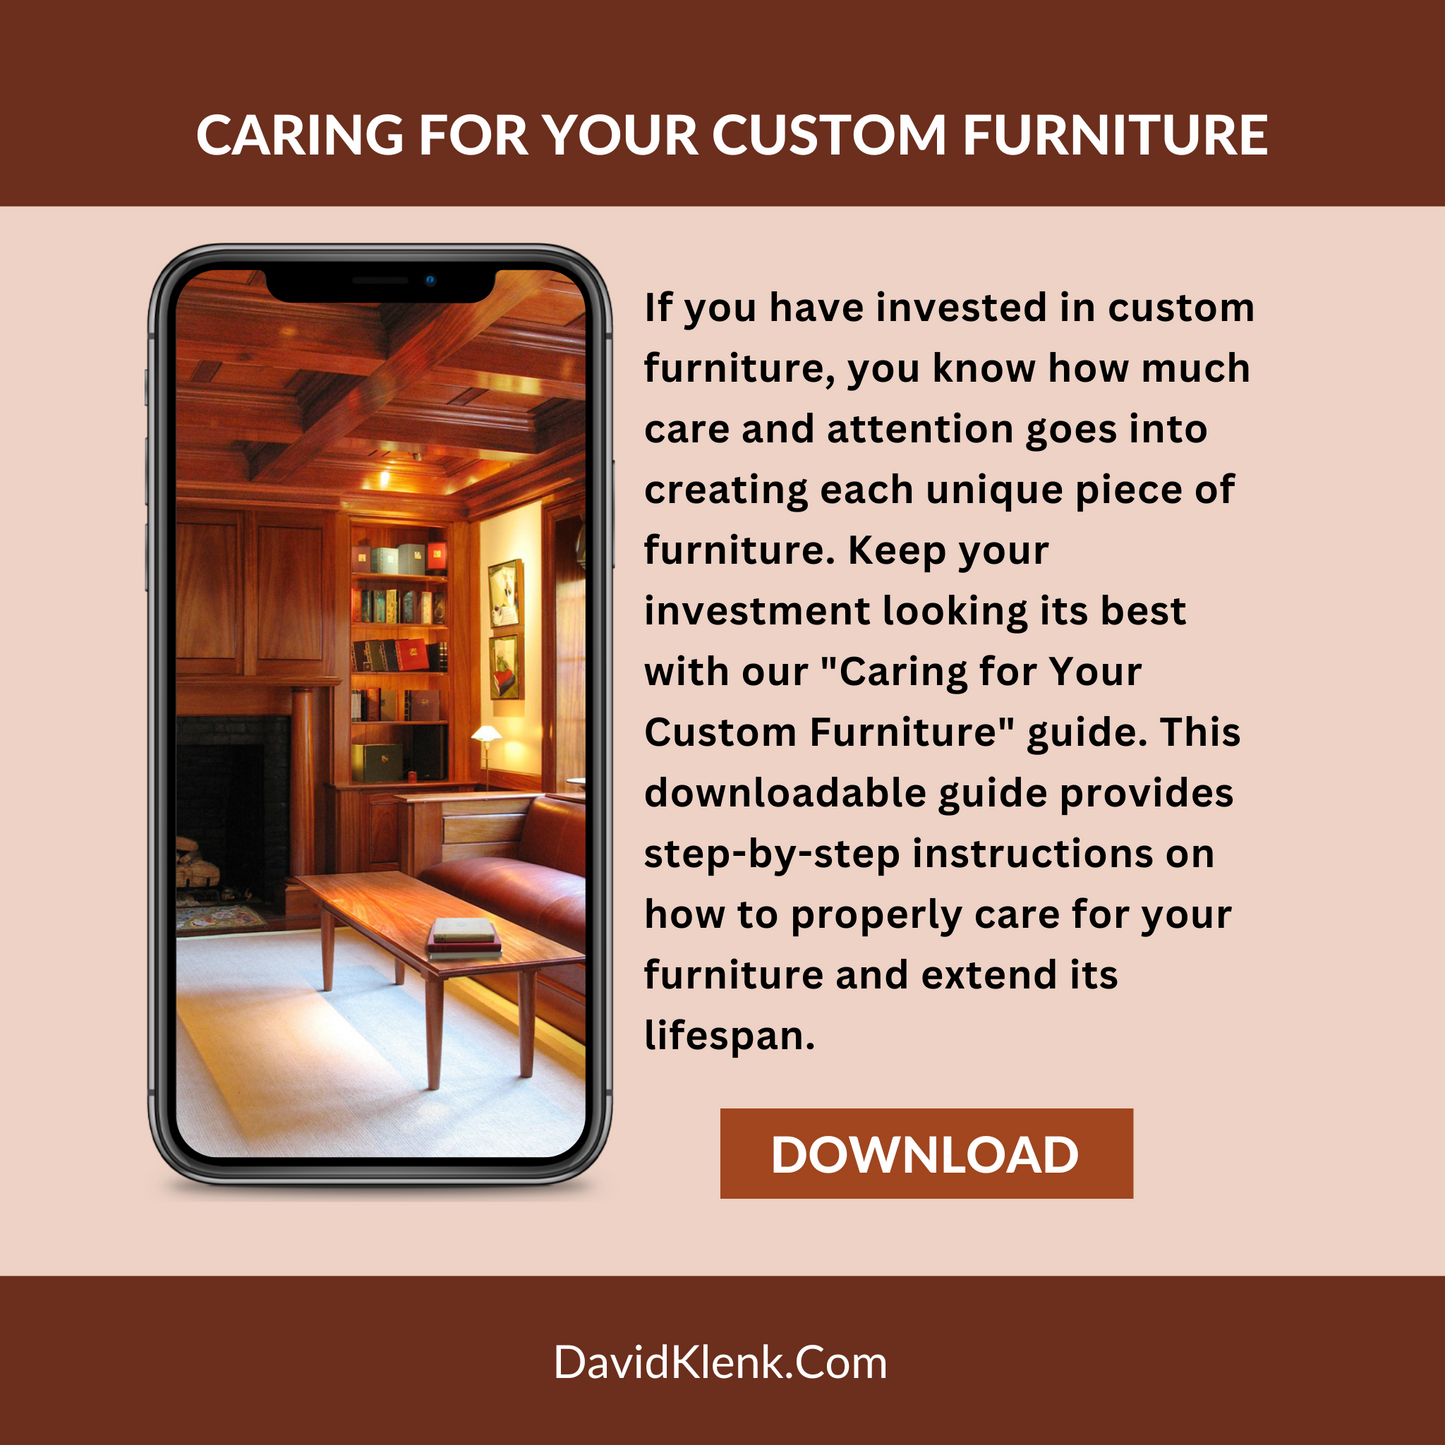 Caring for Your Custom Furniture